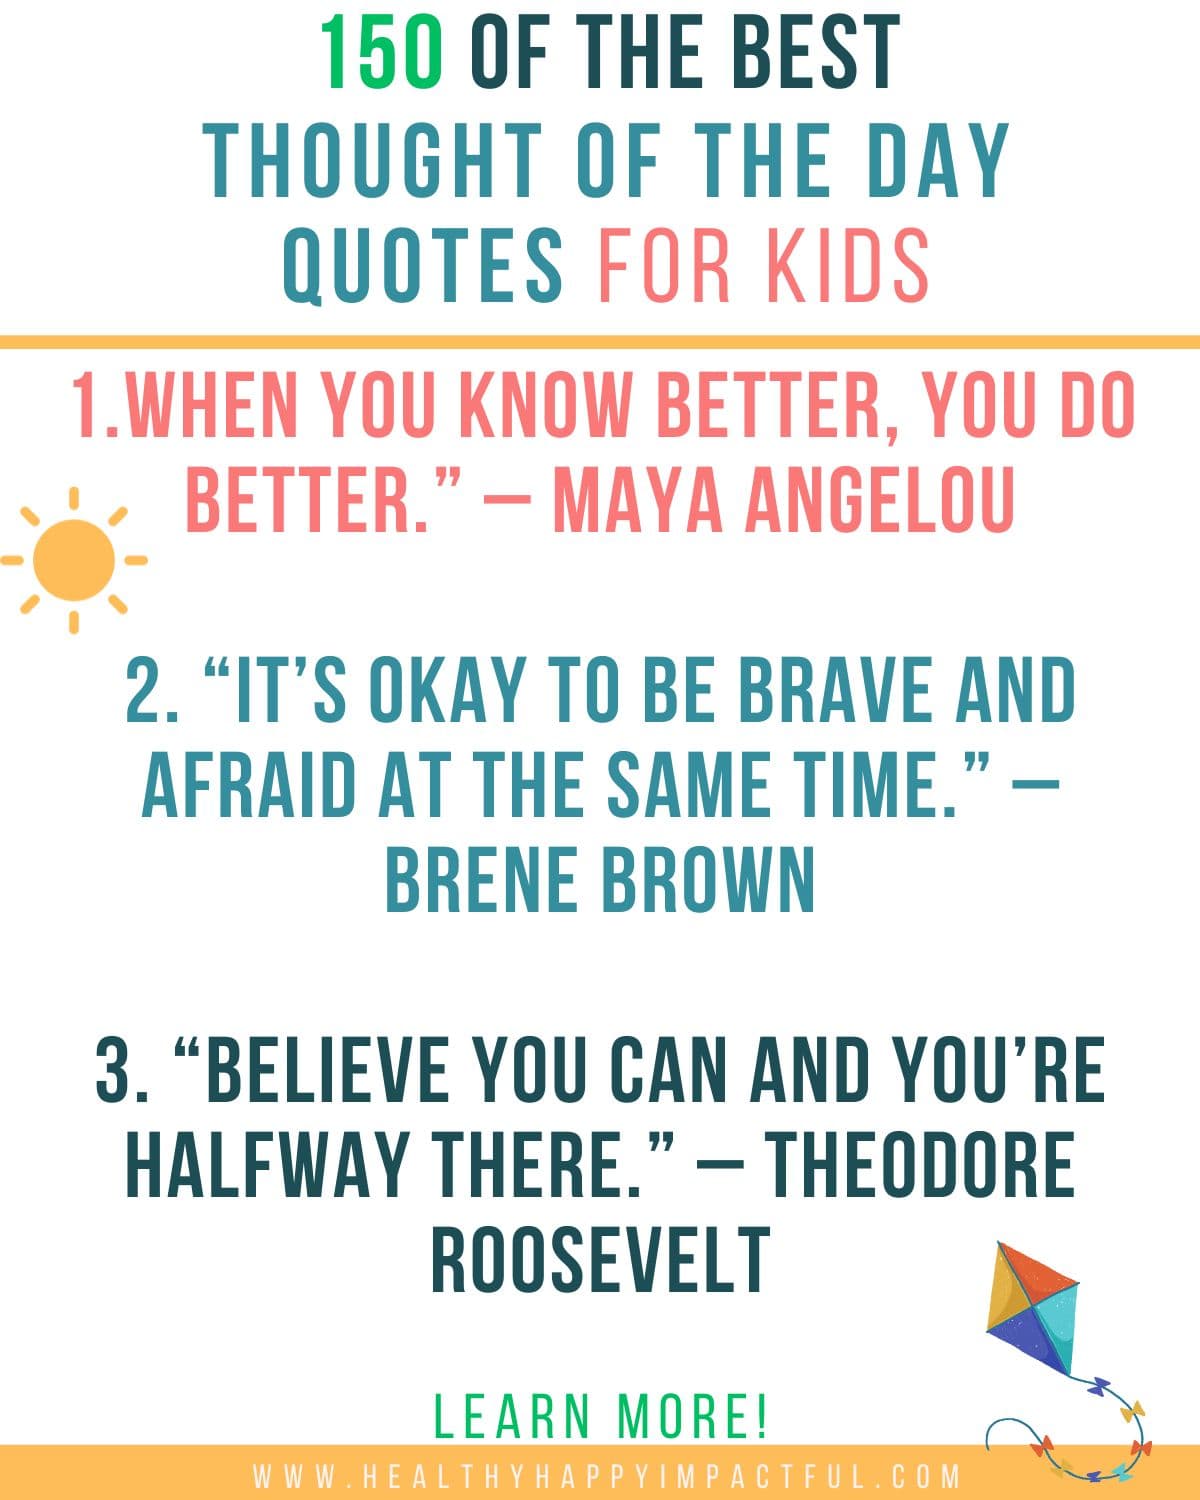 150 best thought of the day or kids quotes pin for encouragement, bravery, wisdom